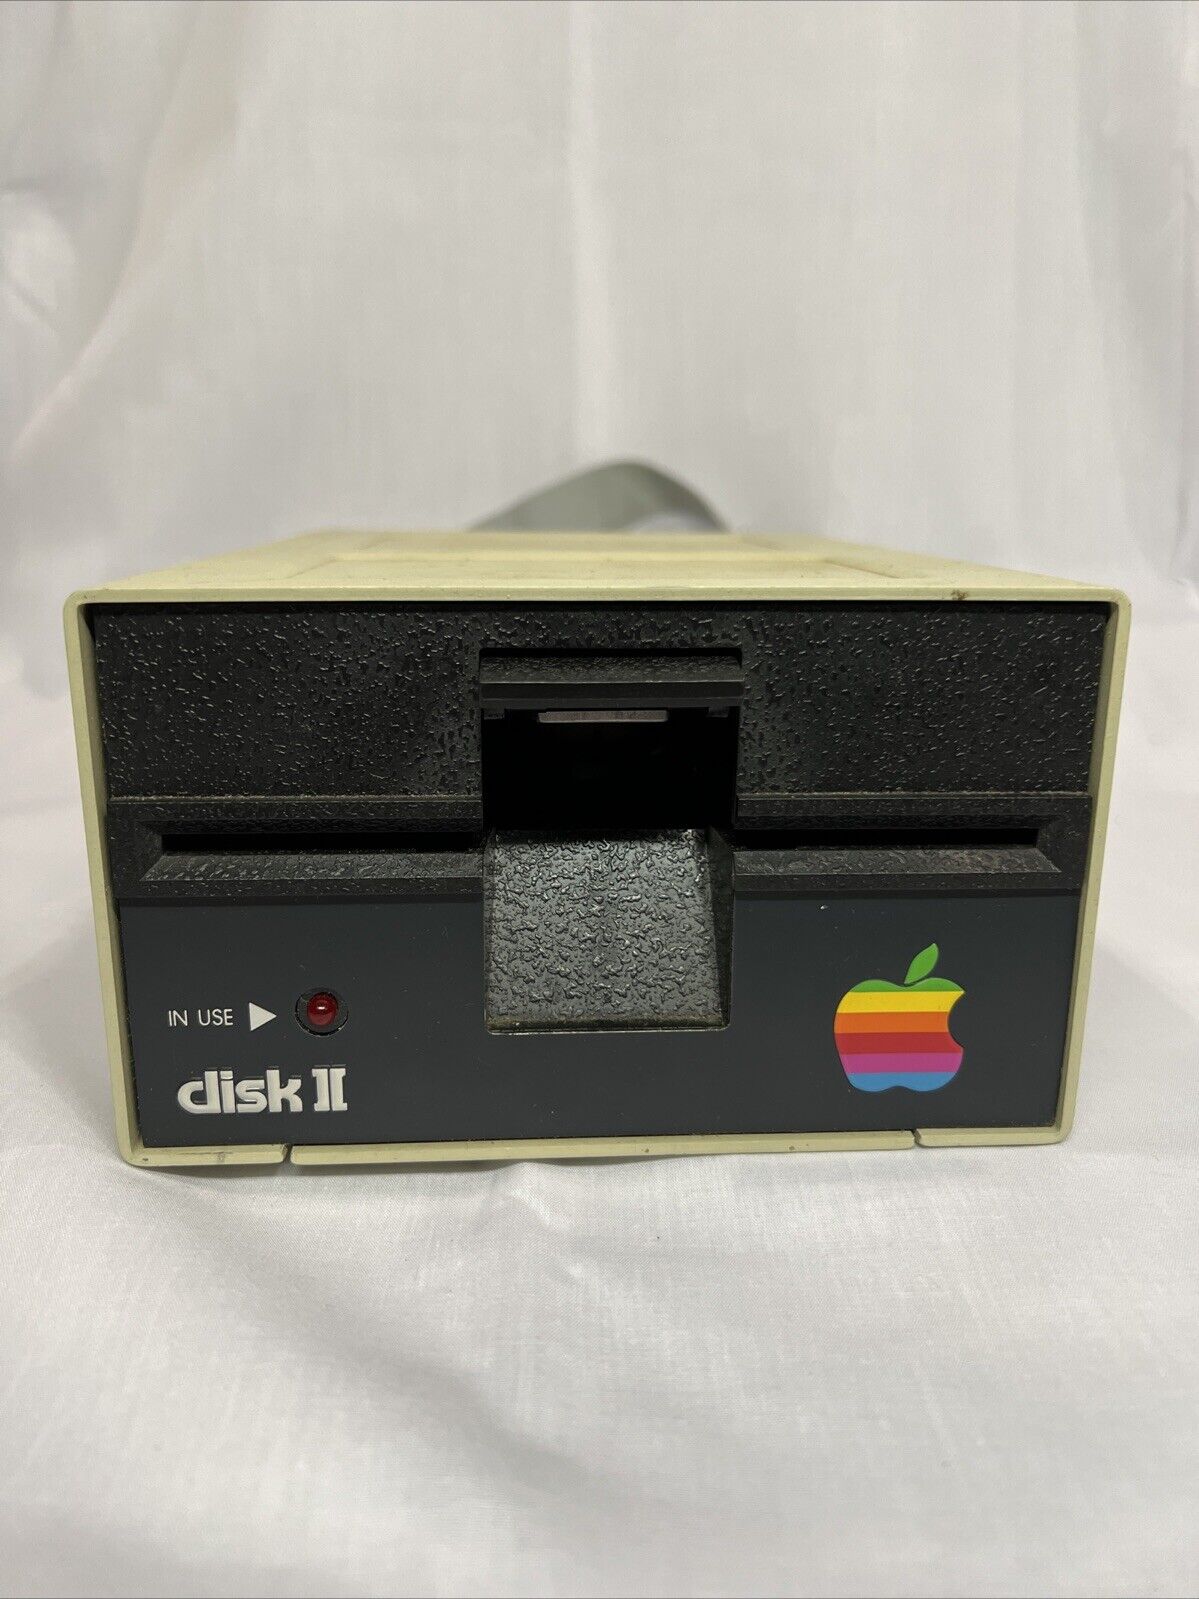 VINTAGE APPLE DISK II 5.25” FLOPPY DRIVE A2M0003 MADE IN USA (UNTESTED)